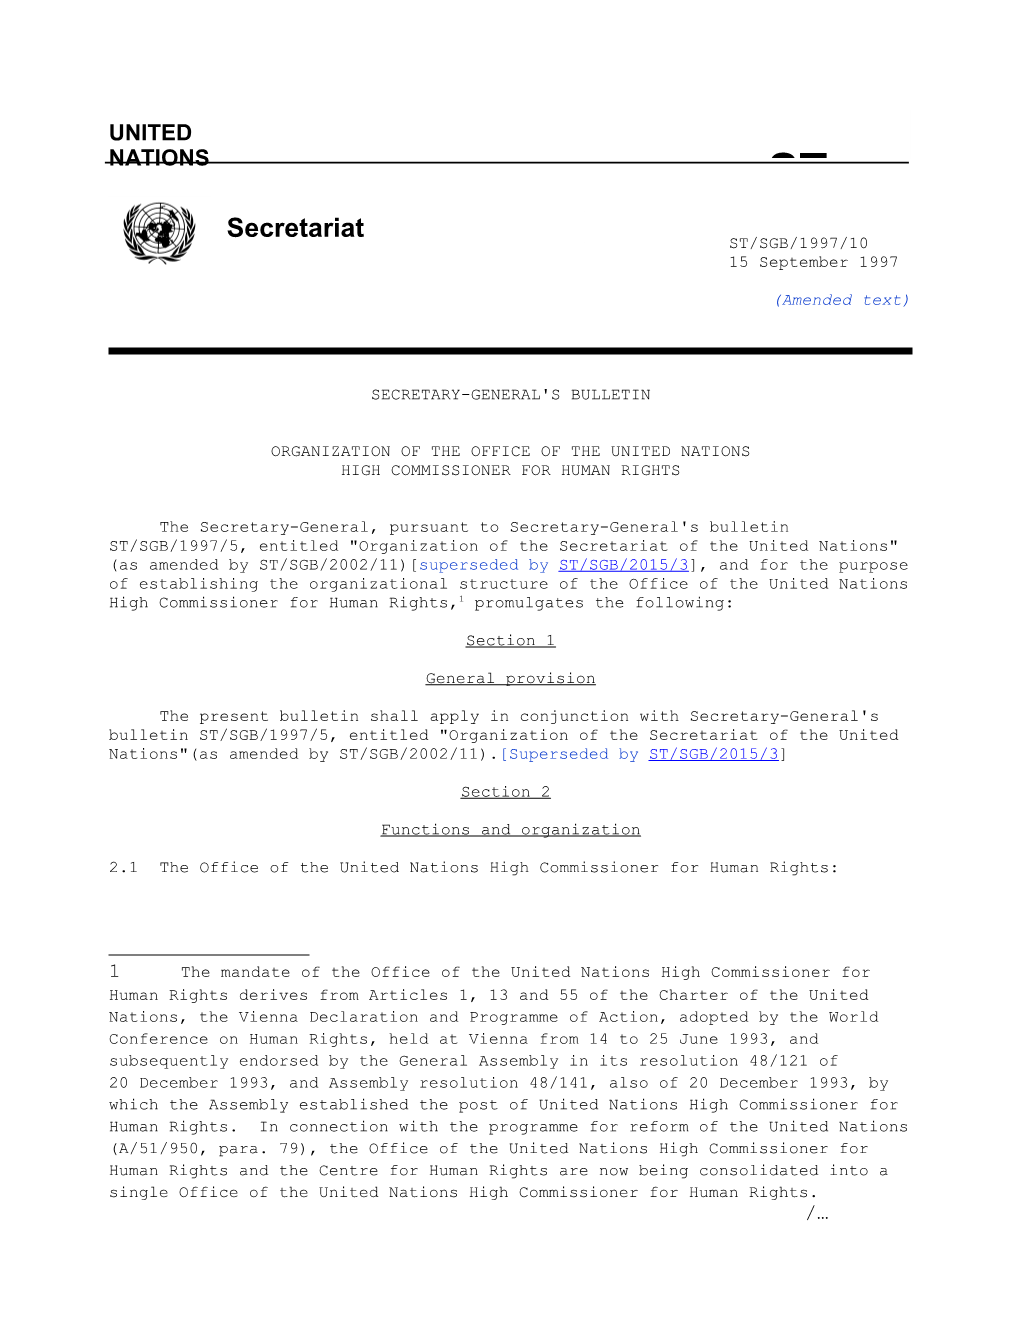 Organization of the Office of the United Nations